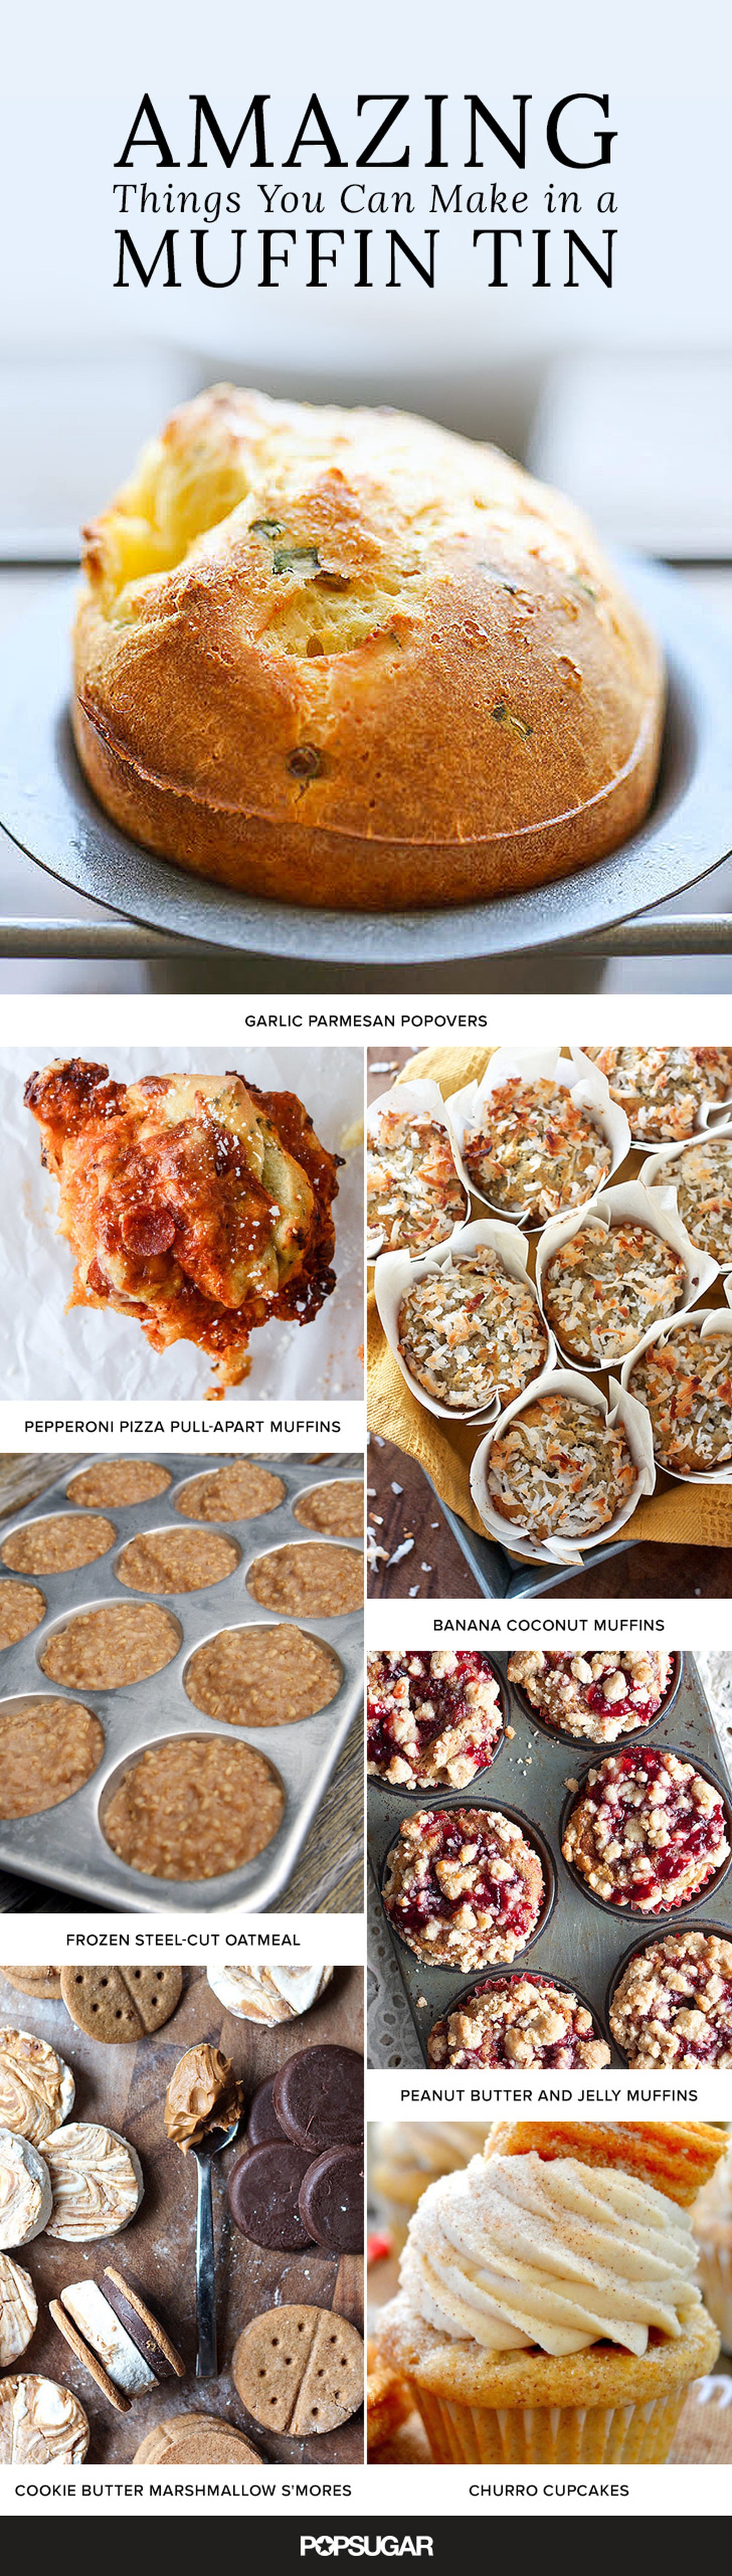 Sweet and Savory Muffin Tin Recipes | POPSUGAR Food